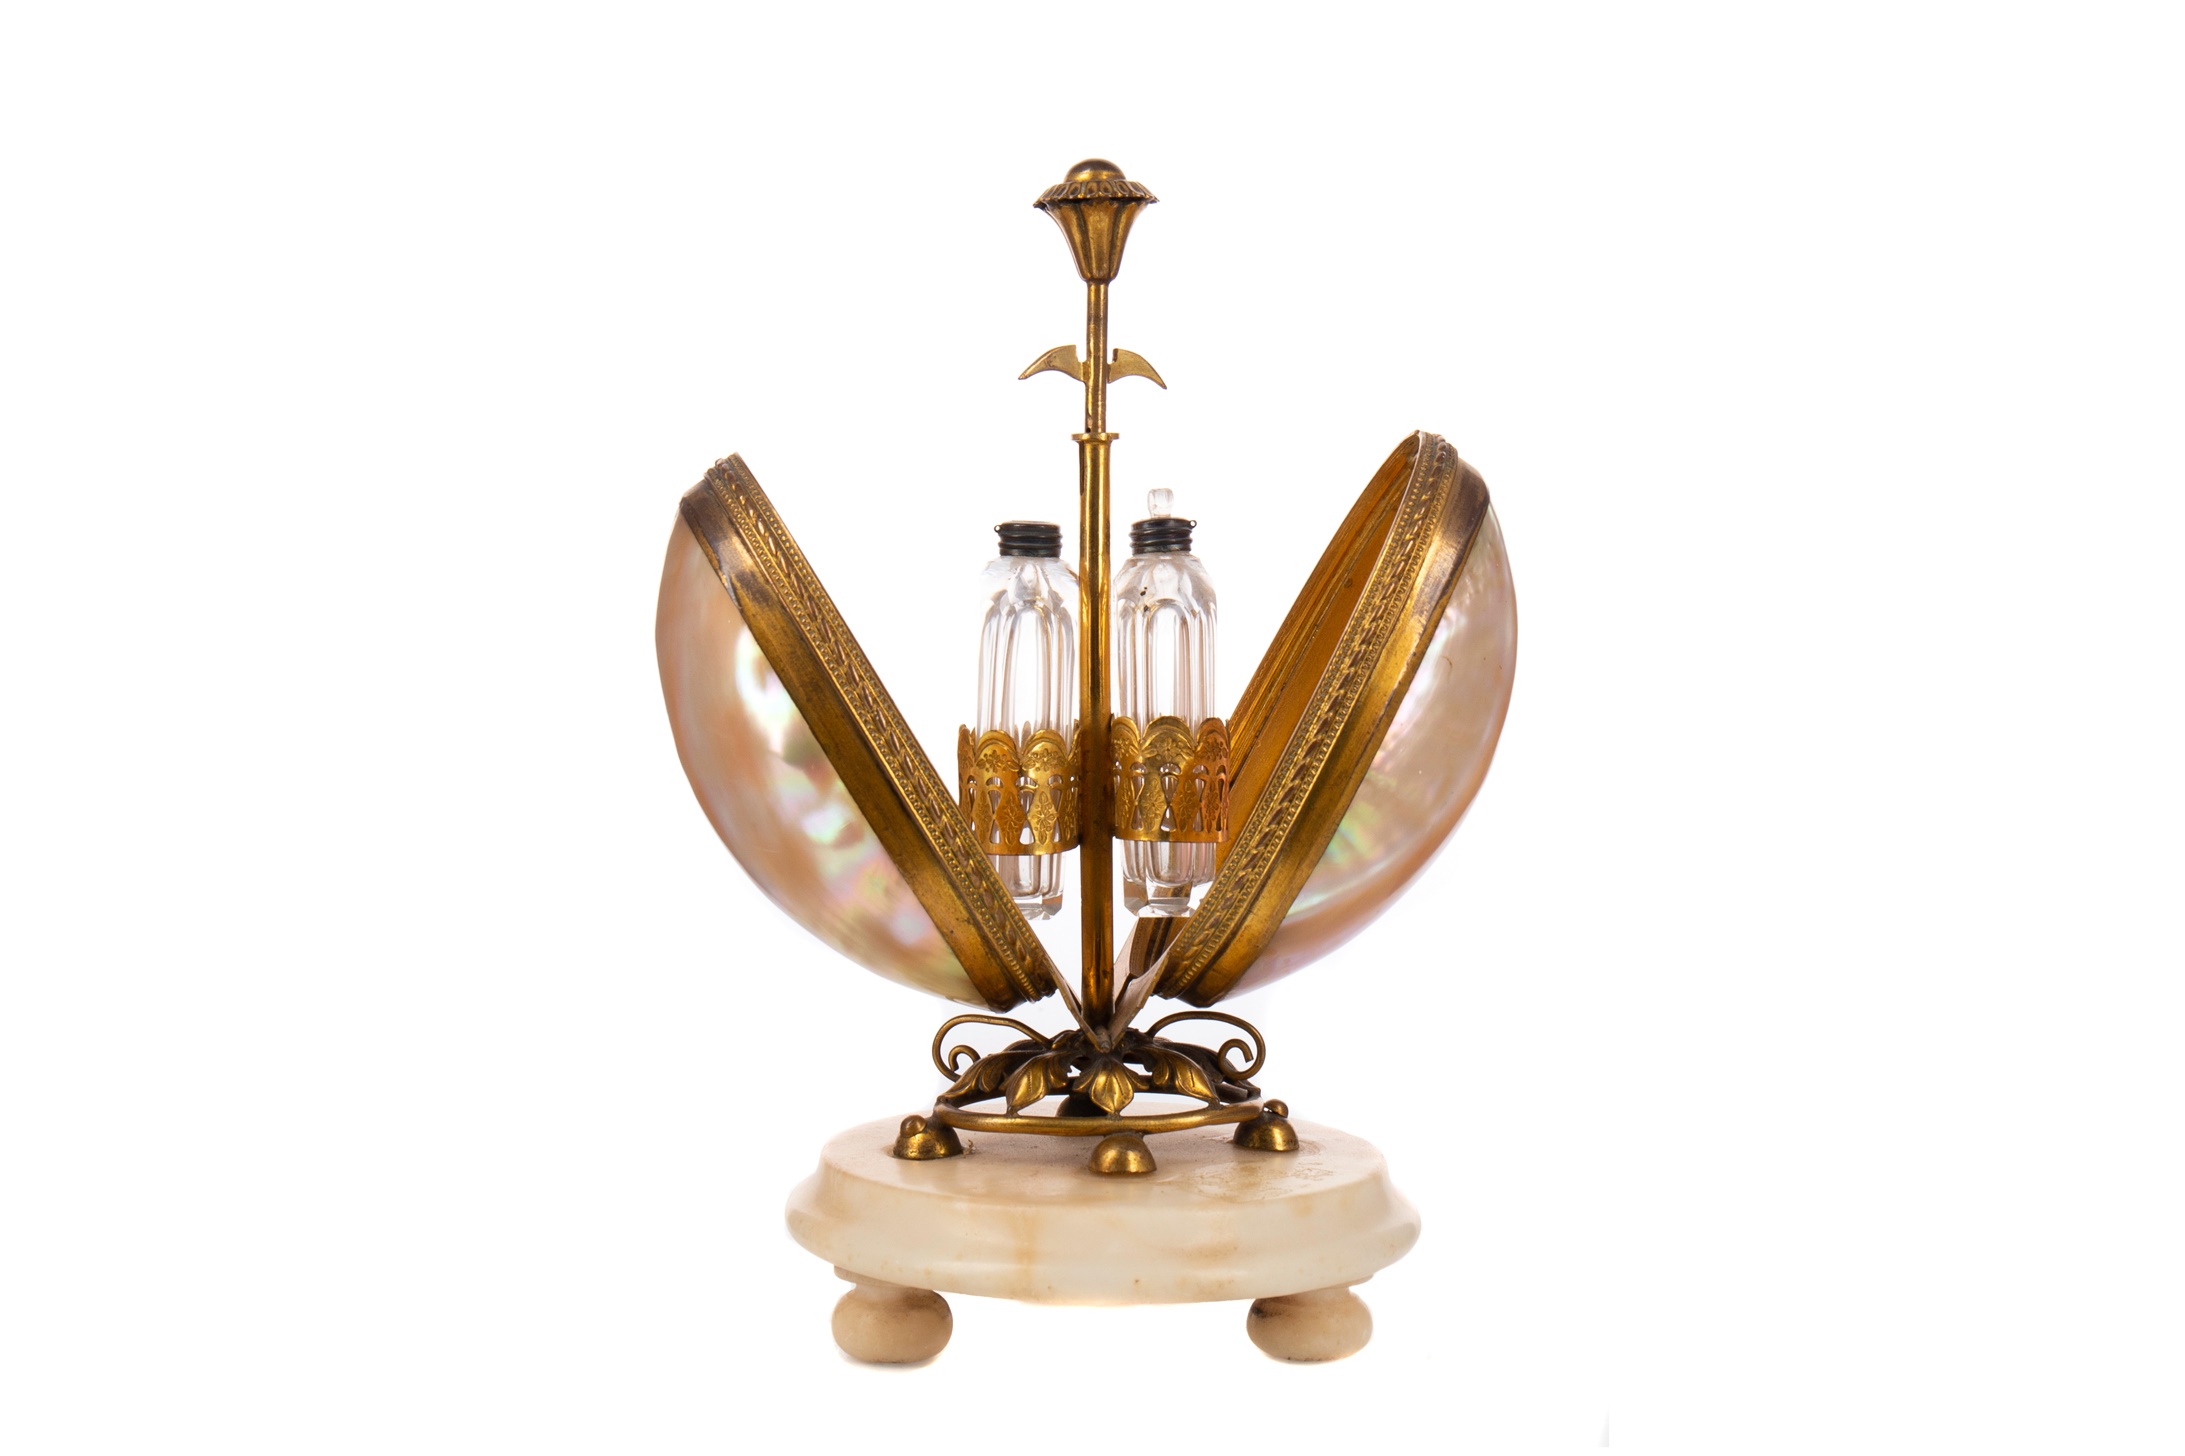 A LATE 19TH CENTURY FRENCH PERFUME CADDY